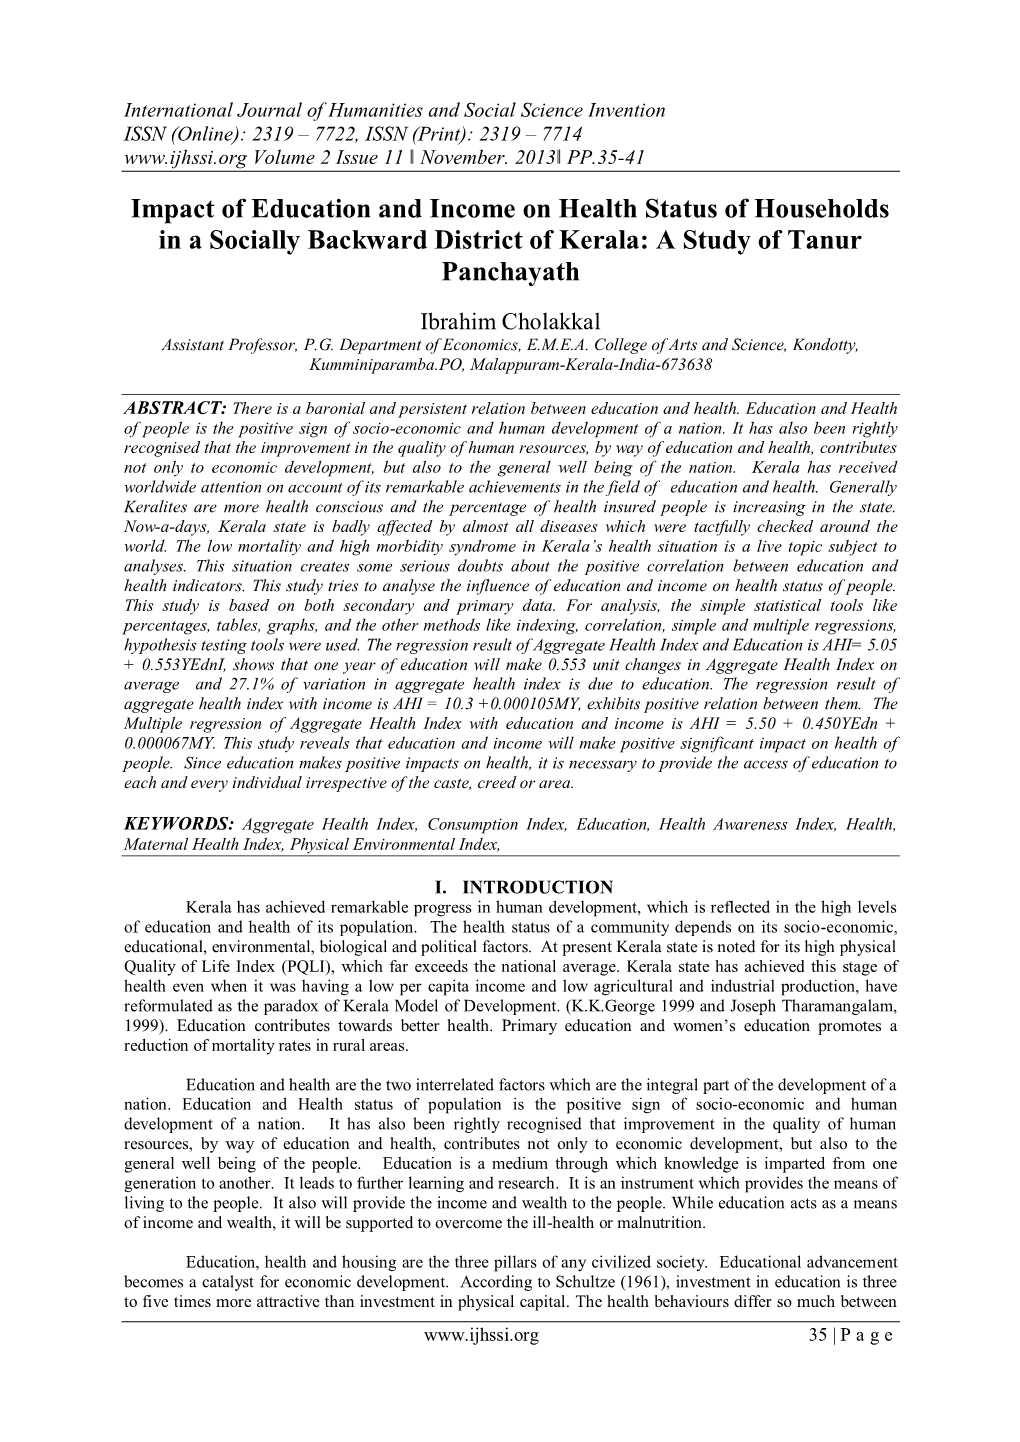 Impact of Education and Income on Health Status of Households in a Socially Backward District of Kerala: a Study of Tanur Panchayath